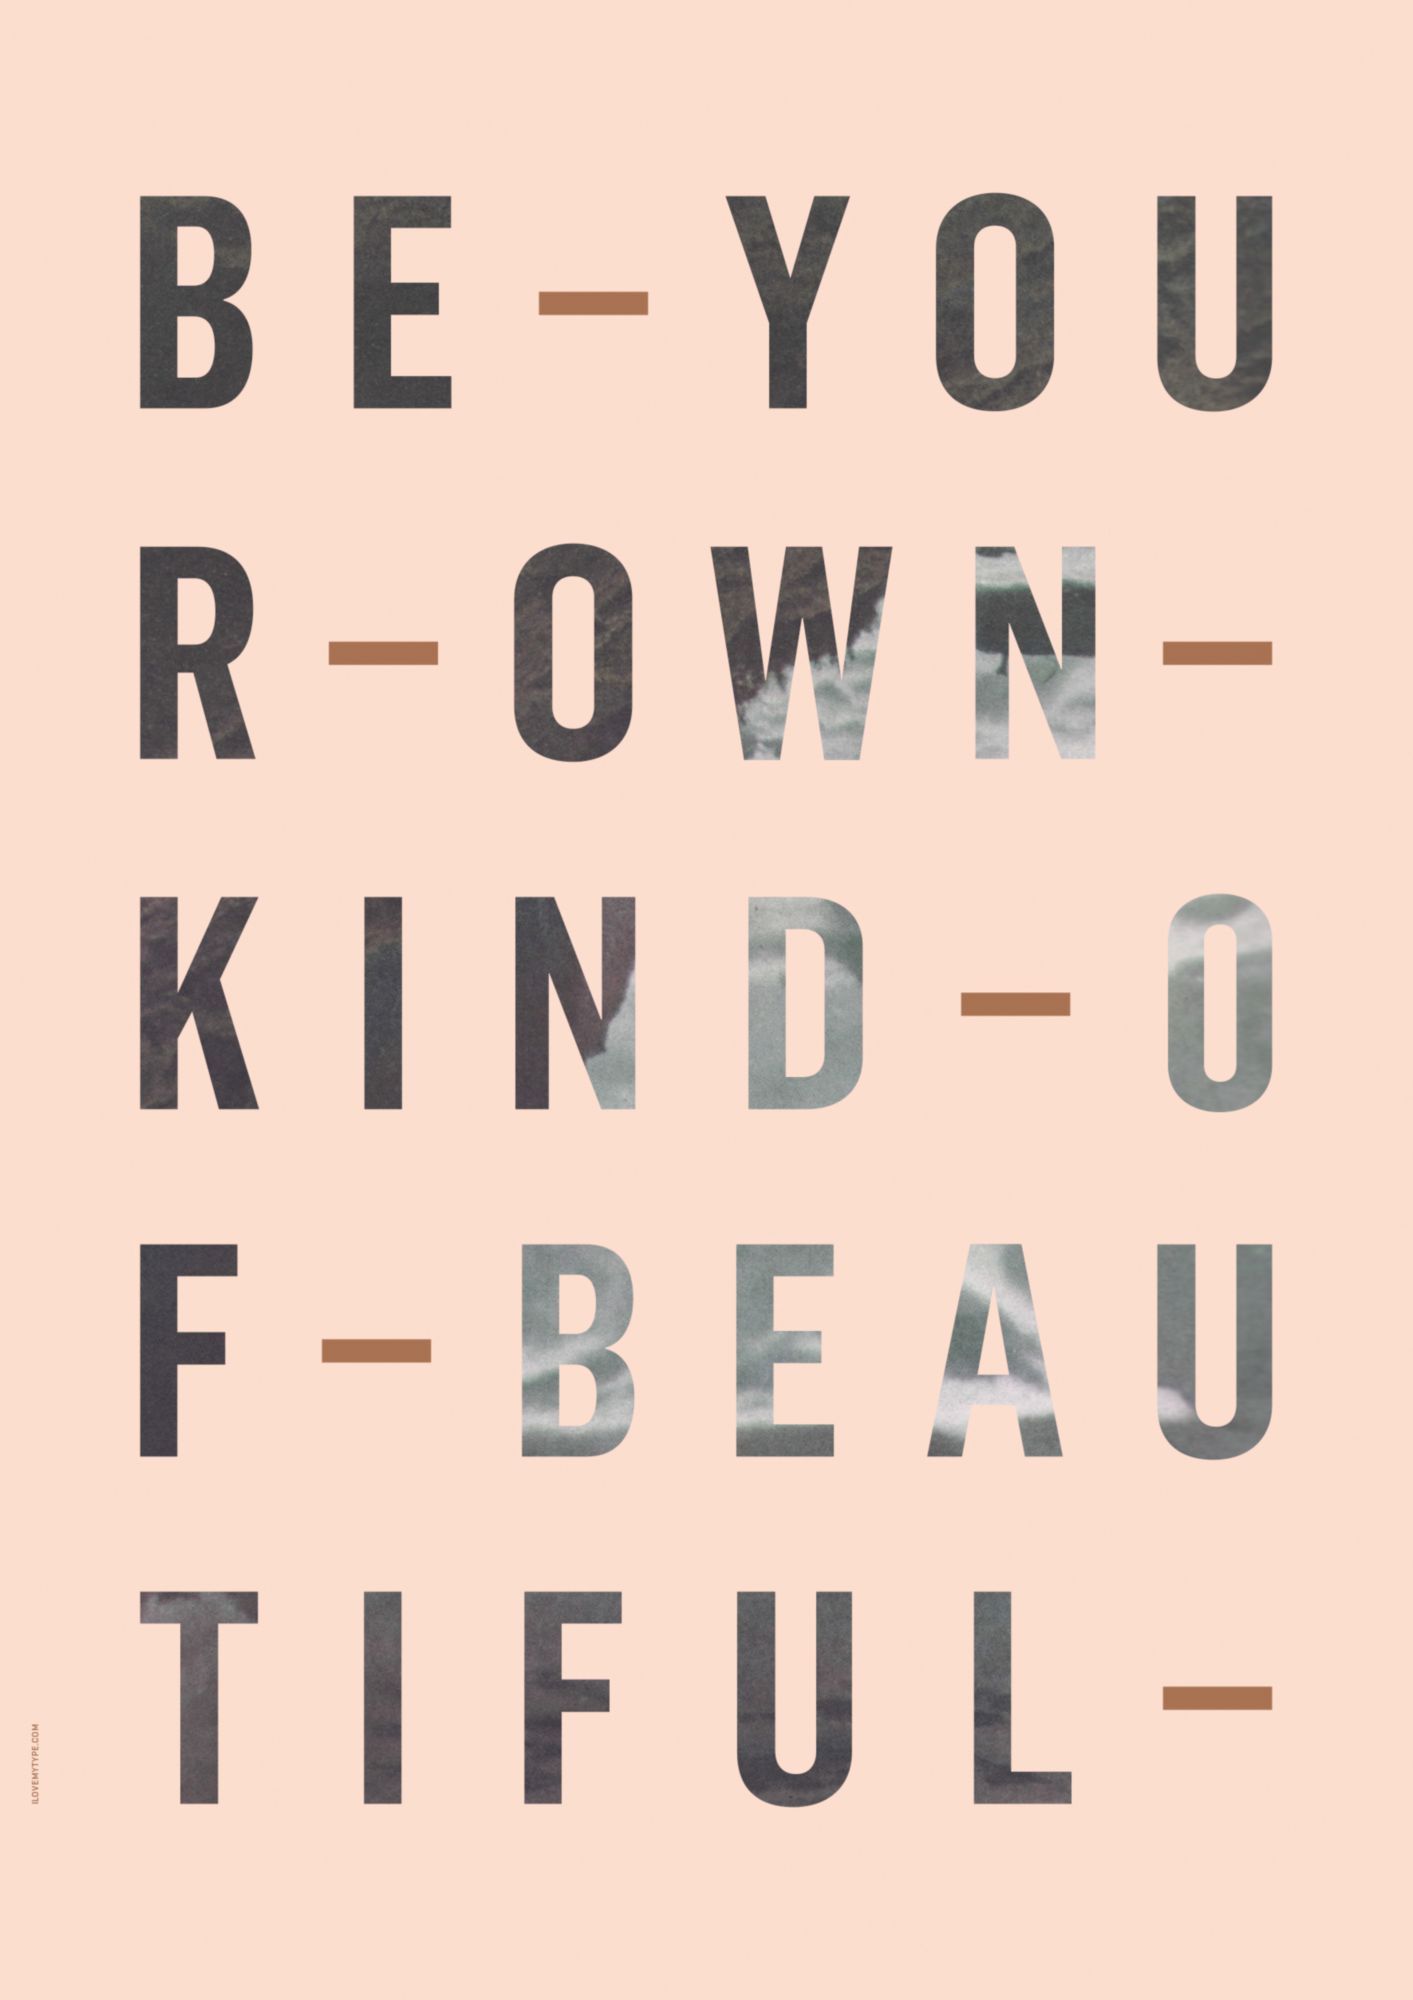 BE YOUR OWN KIND - ROSE-50 x 70